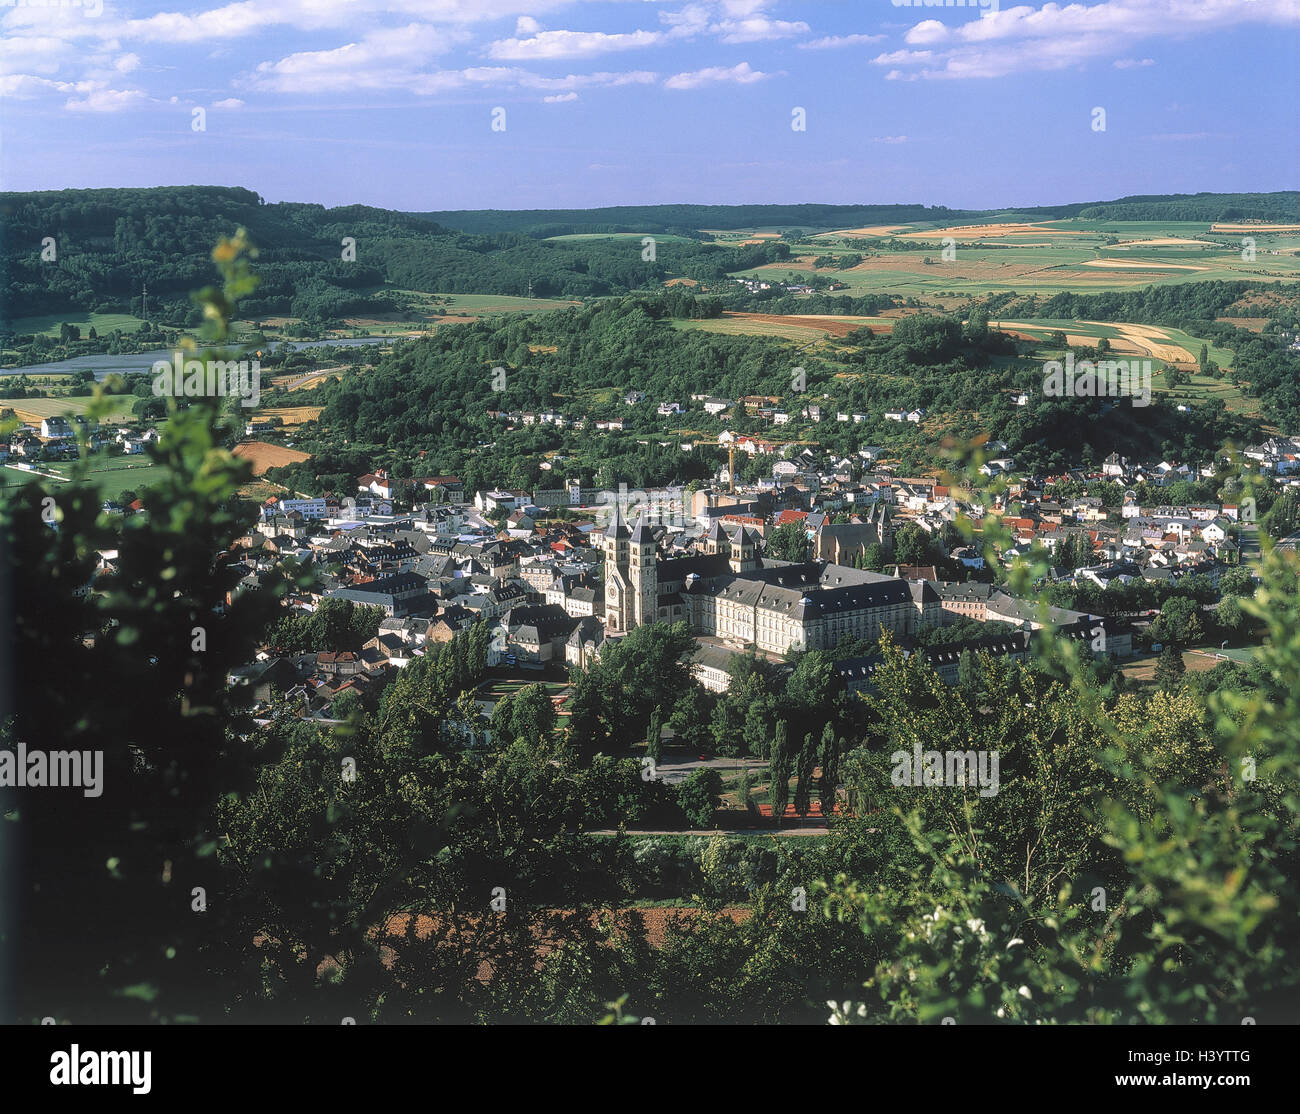 Luxembourg, Echternach, town overview, the Benelux Countries, Benelux, canton capital, town, church, houses, overview, scenery, summer Stock Photo